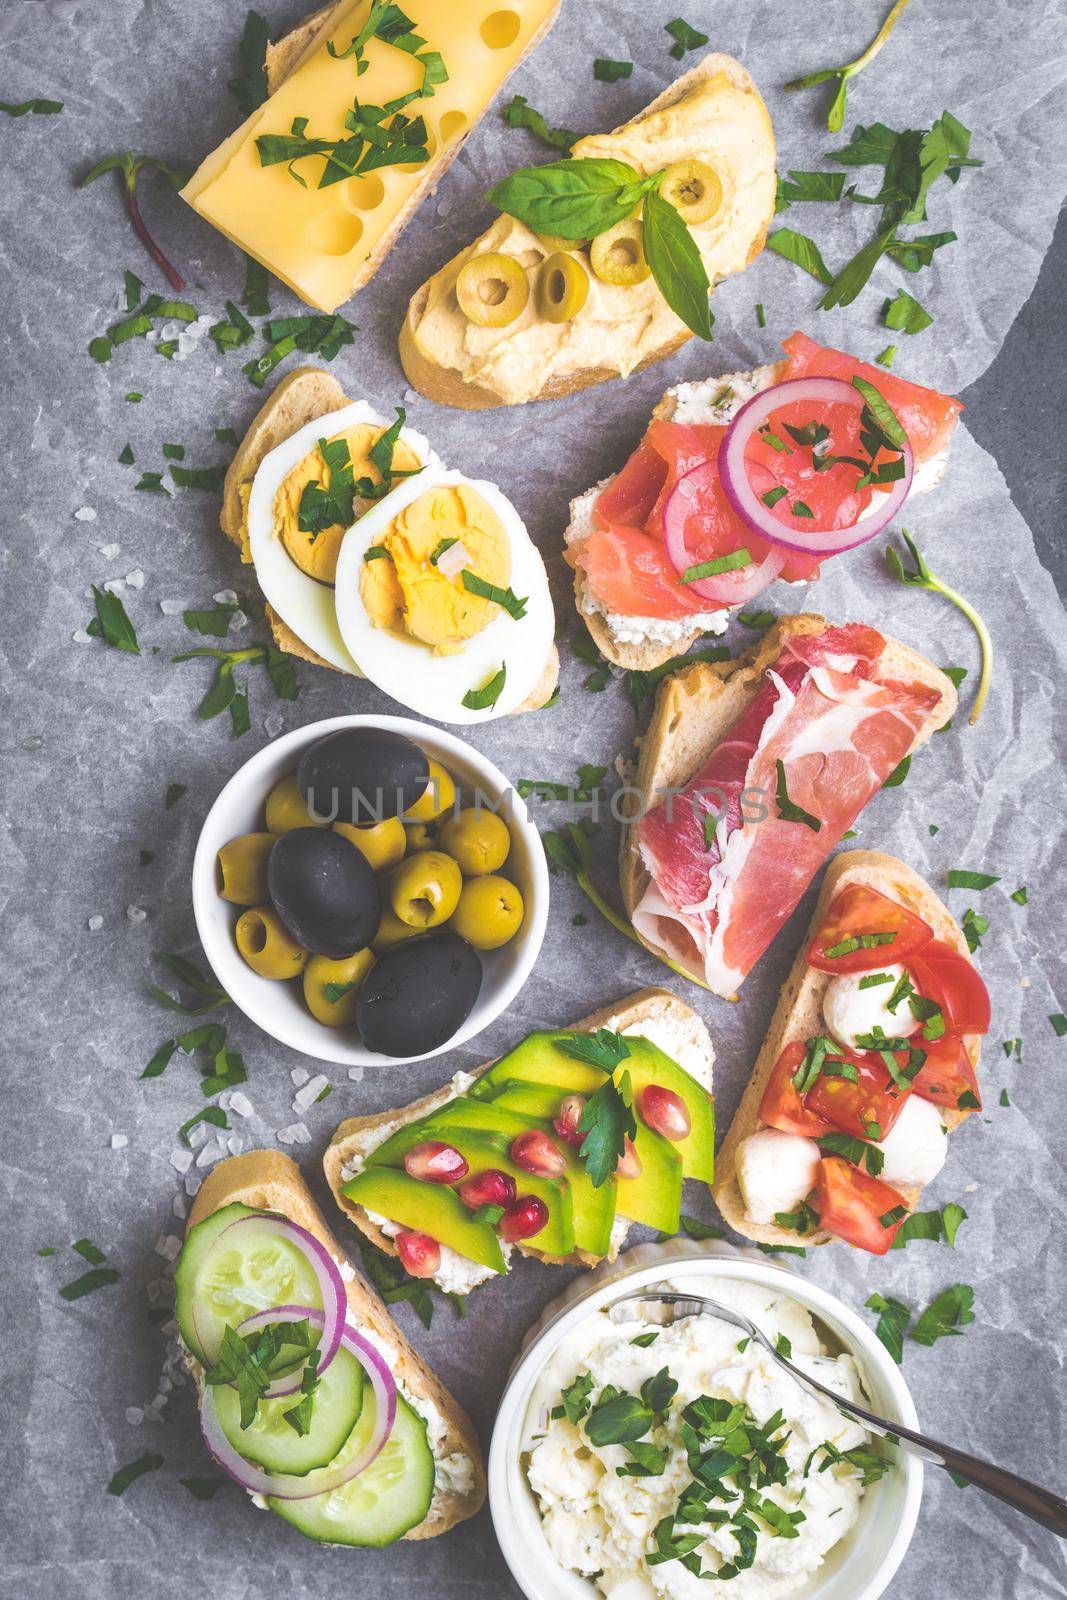 Assorted healthy sandwiches set background. Sandwich bar or buffet. Ciabatta sandwiches with dips, fish, cheese, meat, vegetables. Top view. Making sandwiches concept. Lunch time snacks. From above